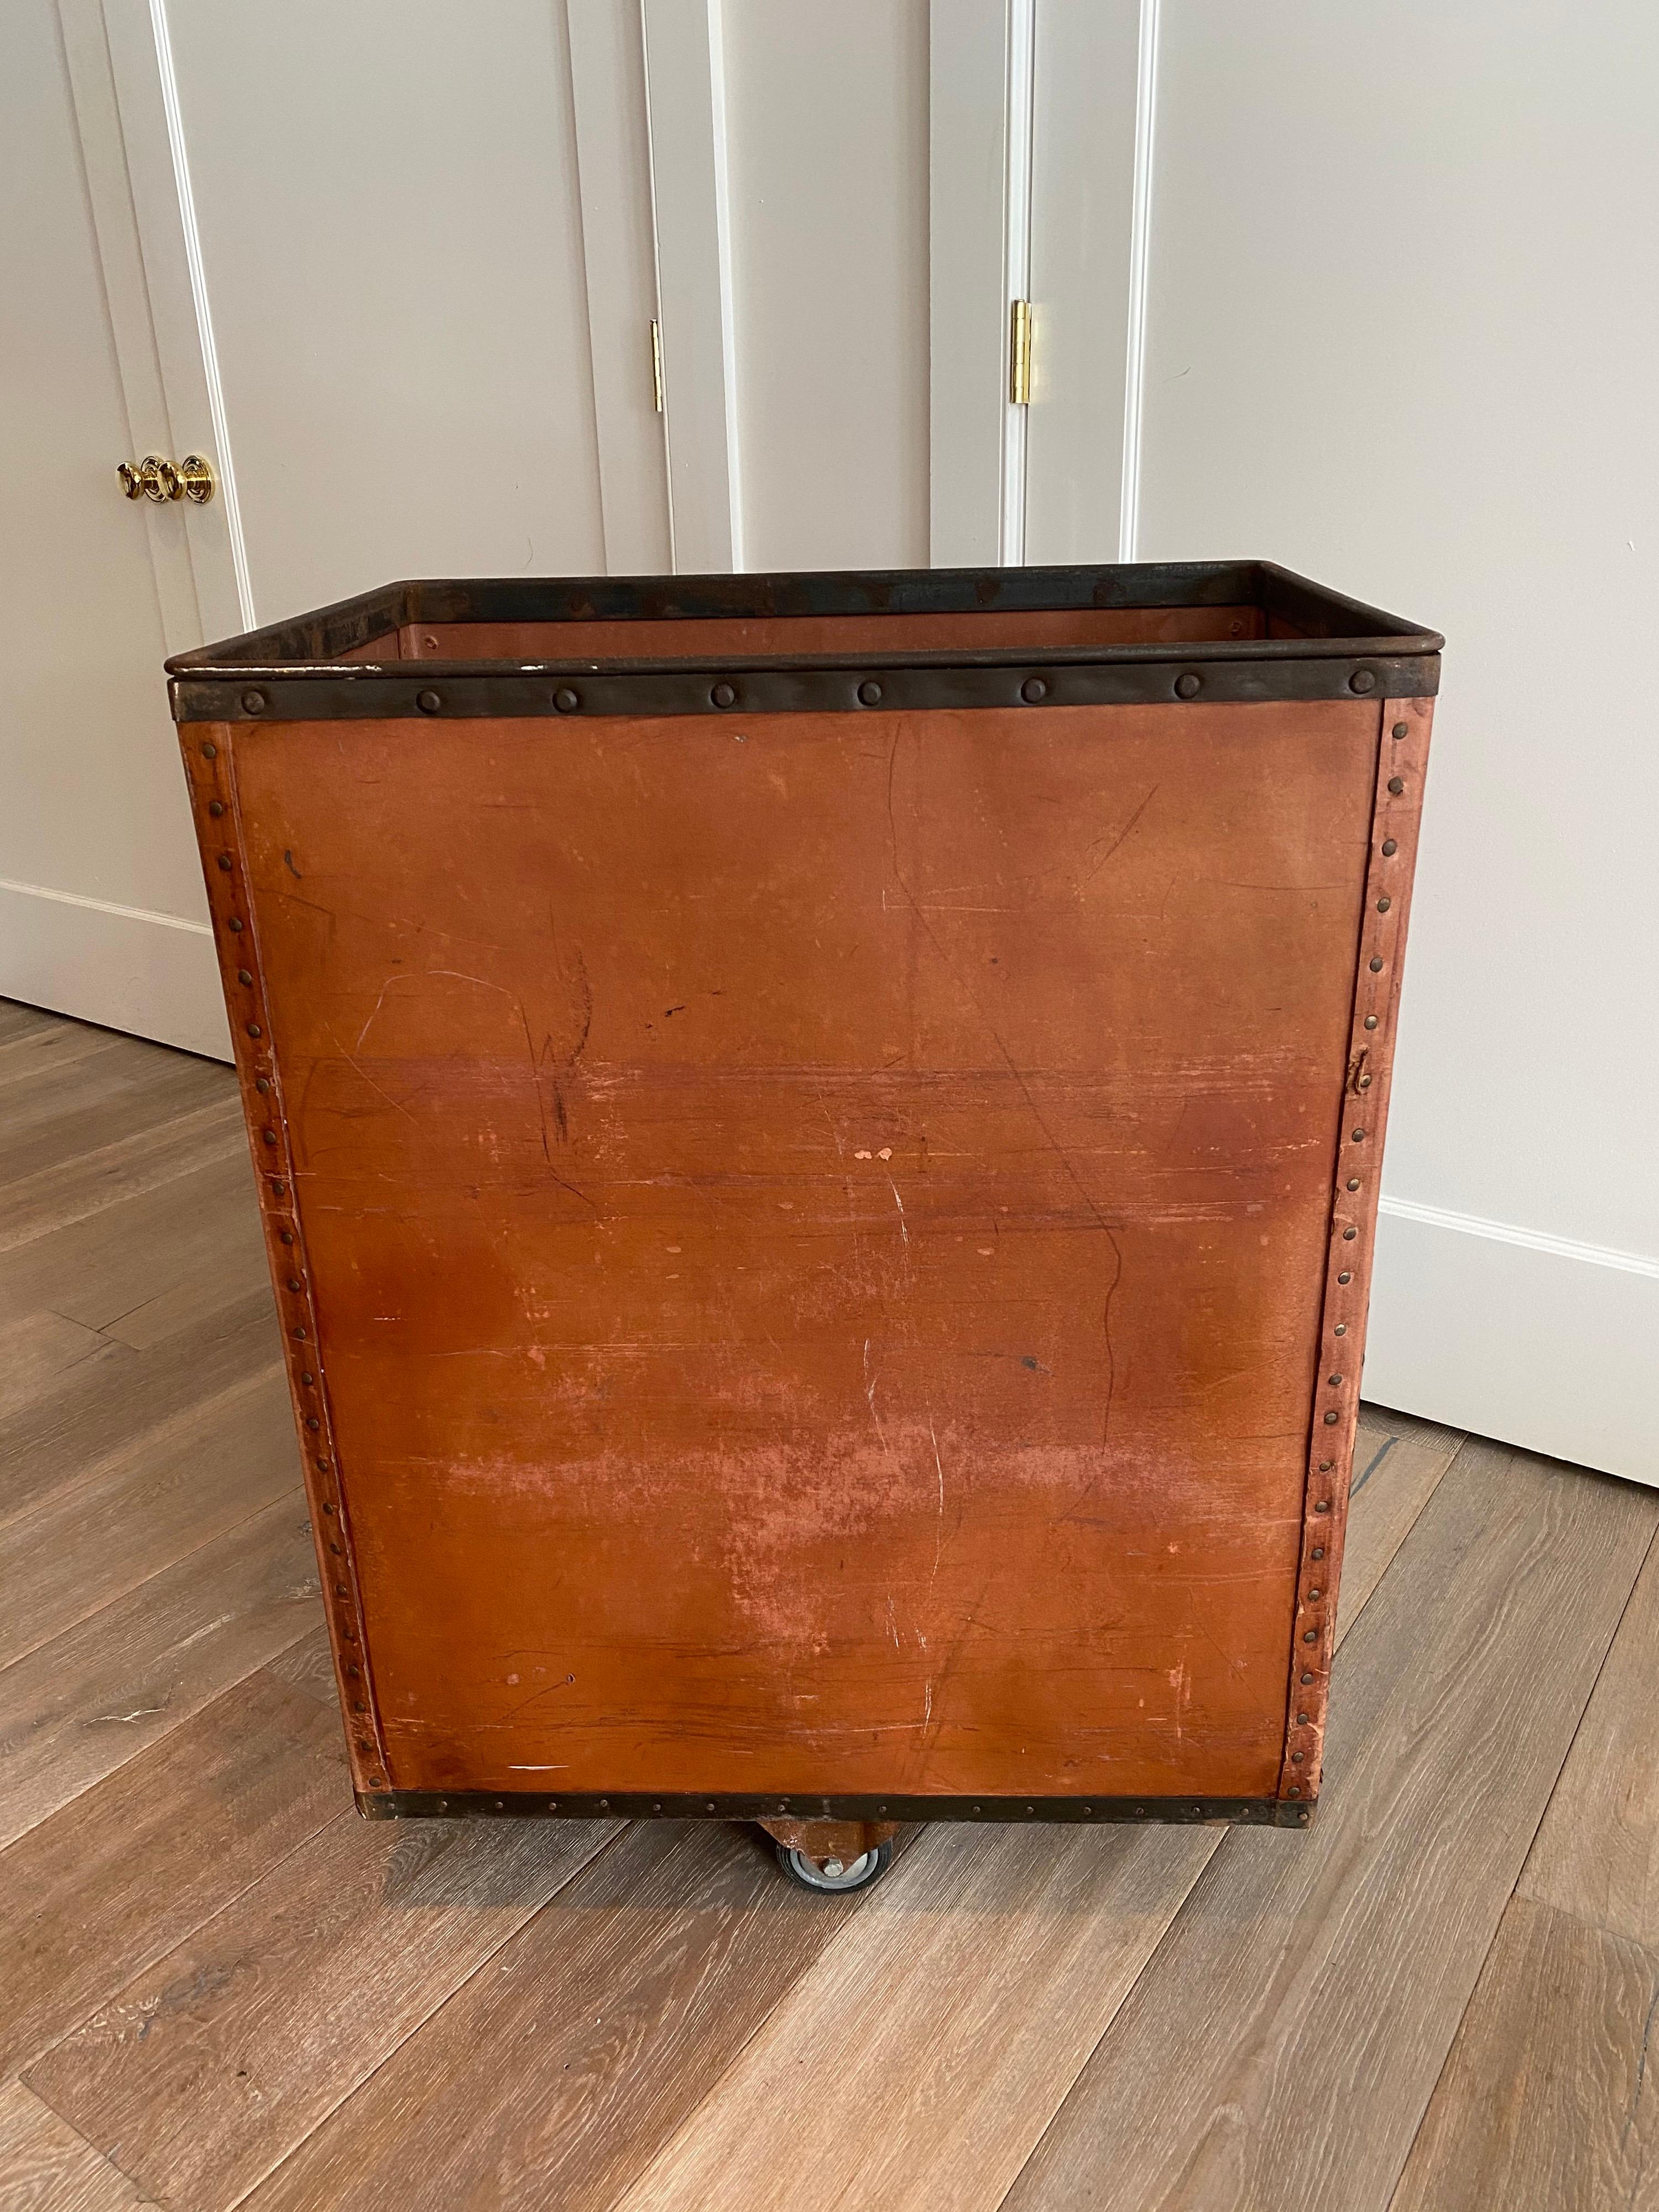 A vintage Industrial factory box car by FedCo fibre bin, circa 1950s. With burnt orange basin. walls, metal riveted framing and wood plank base on four castors. A great bin for display or storage. Strong and sturdy construction- wheels role